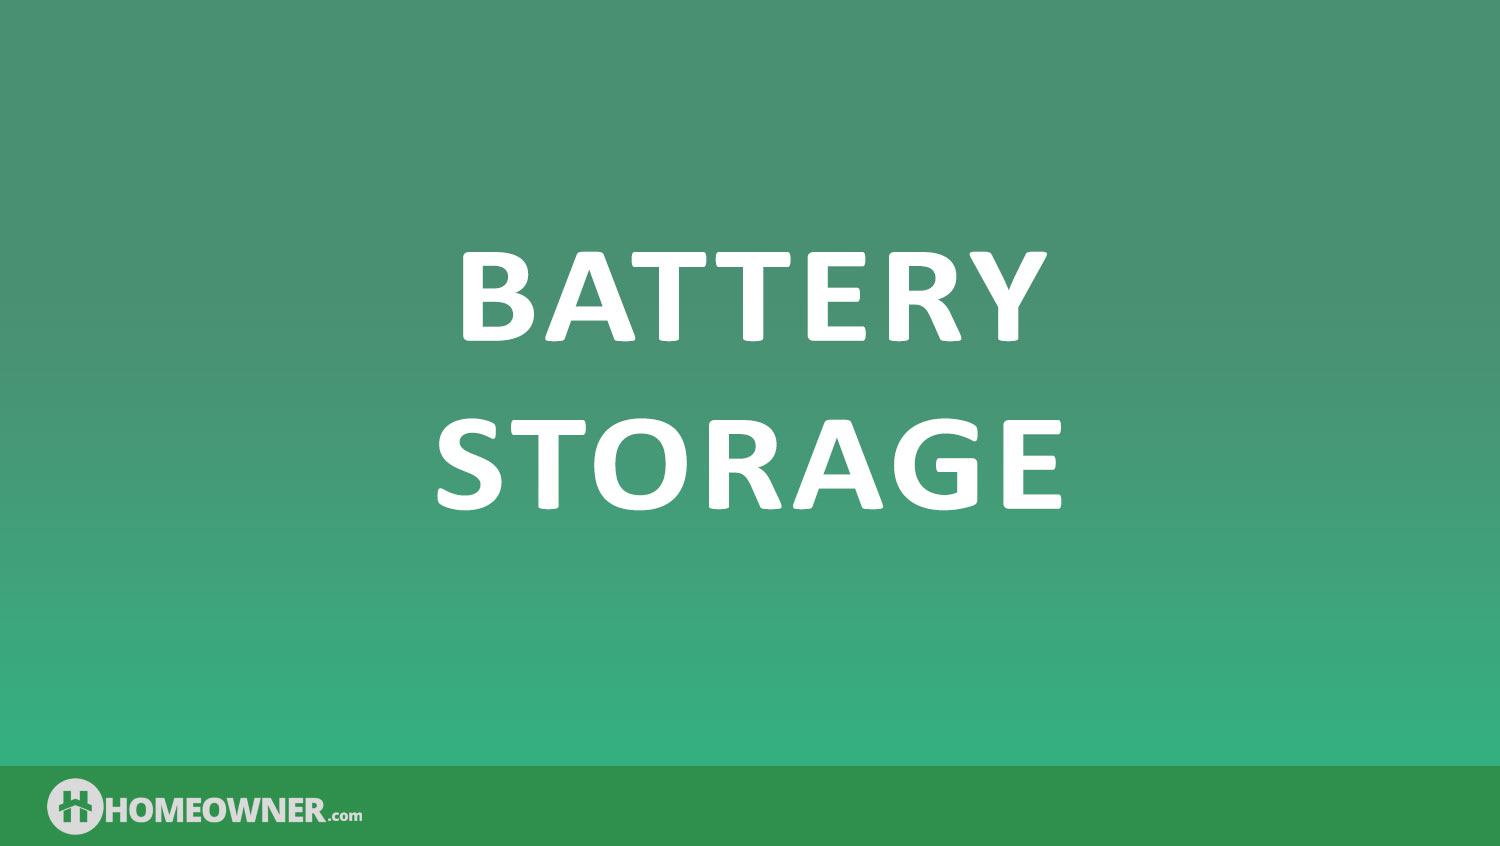 Battery Storage as Back Up Power